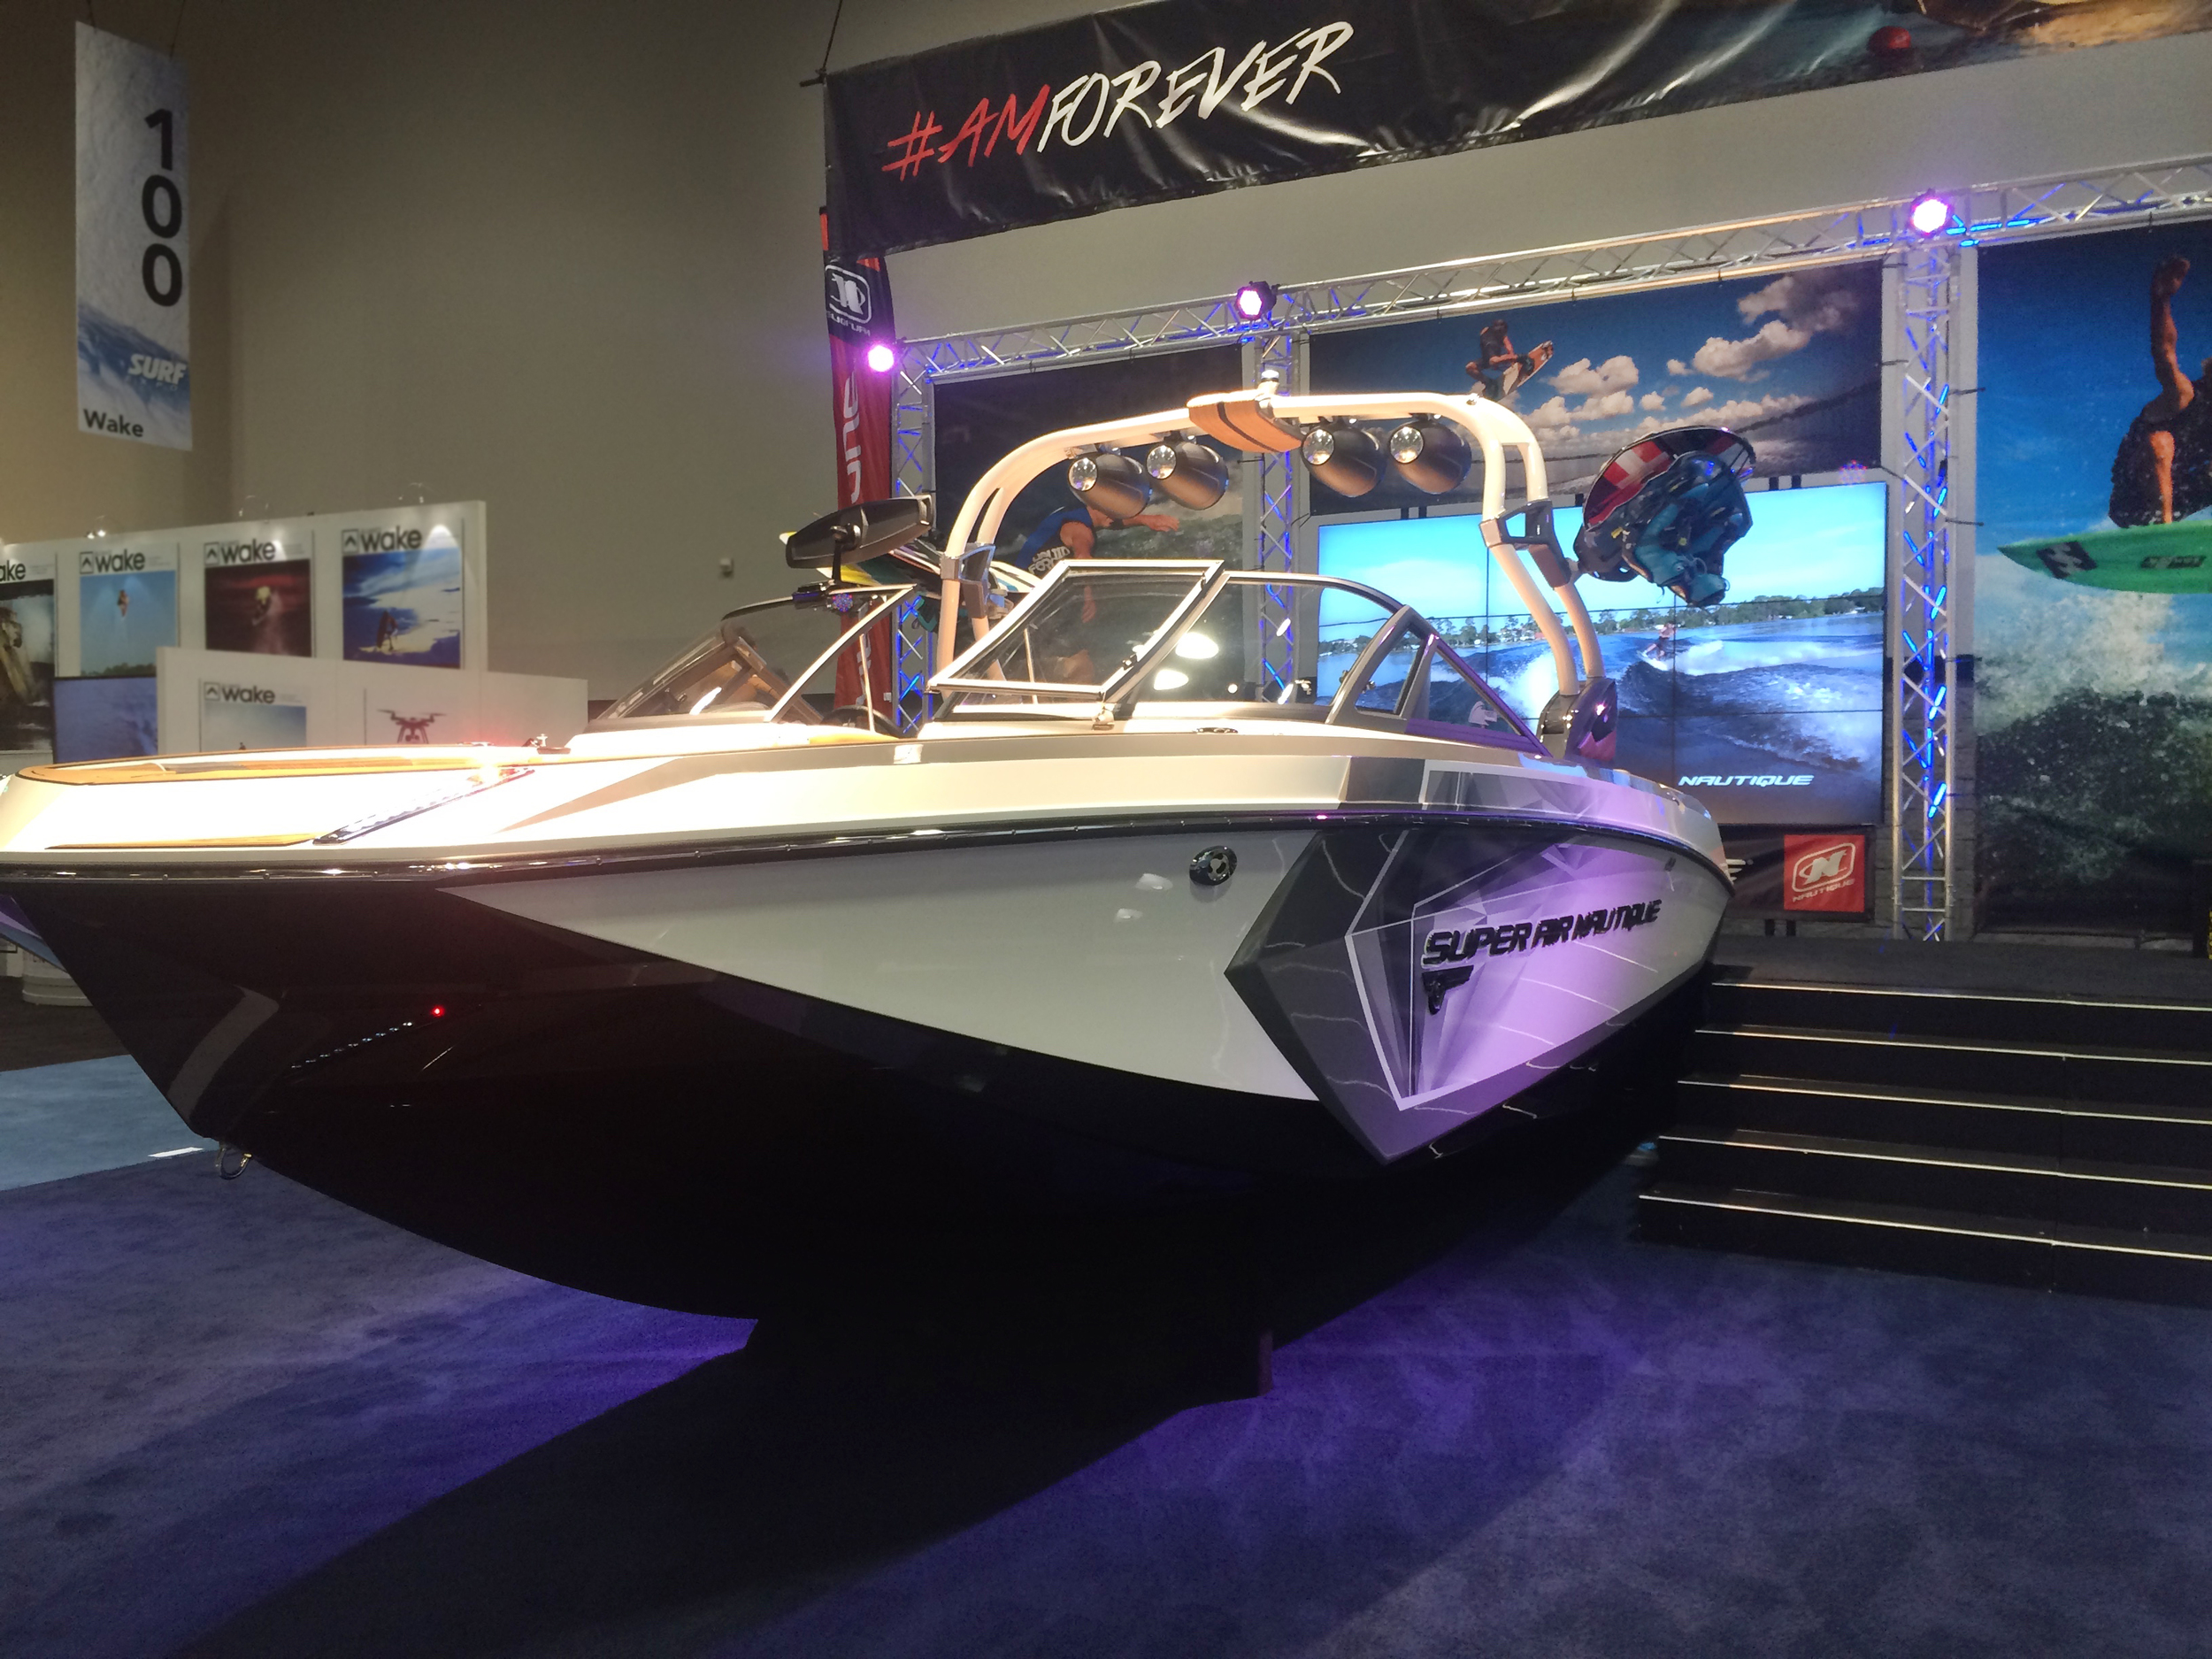  Simple but cool boat display from Nautique that made it feel like the wake was really right behind it. 